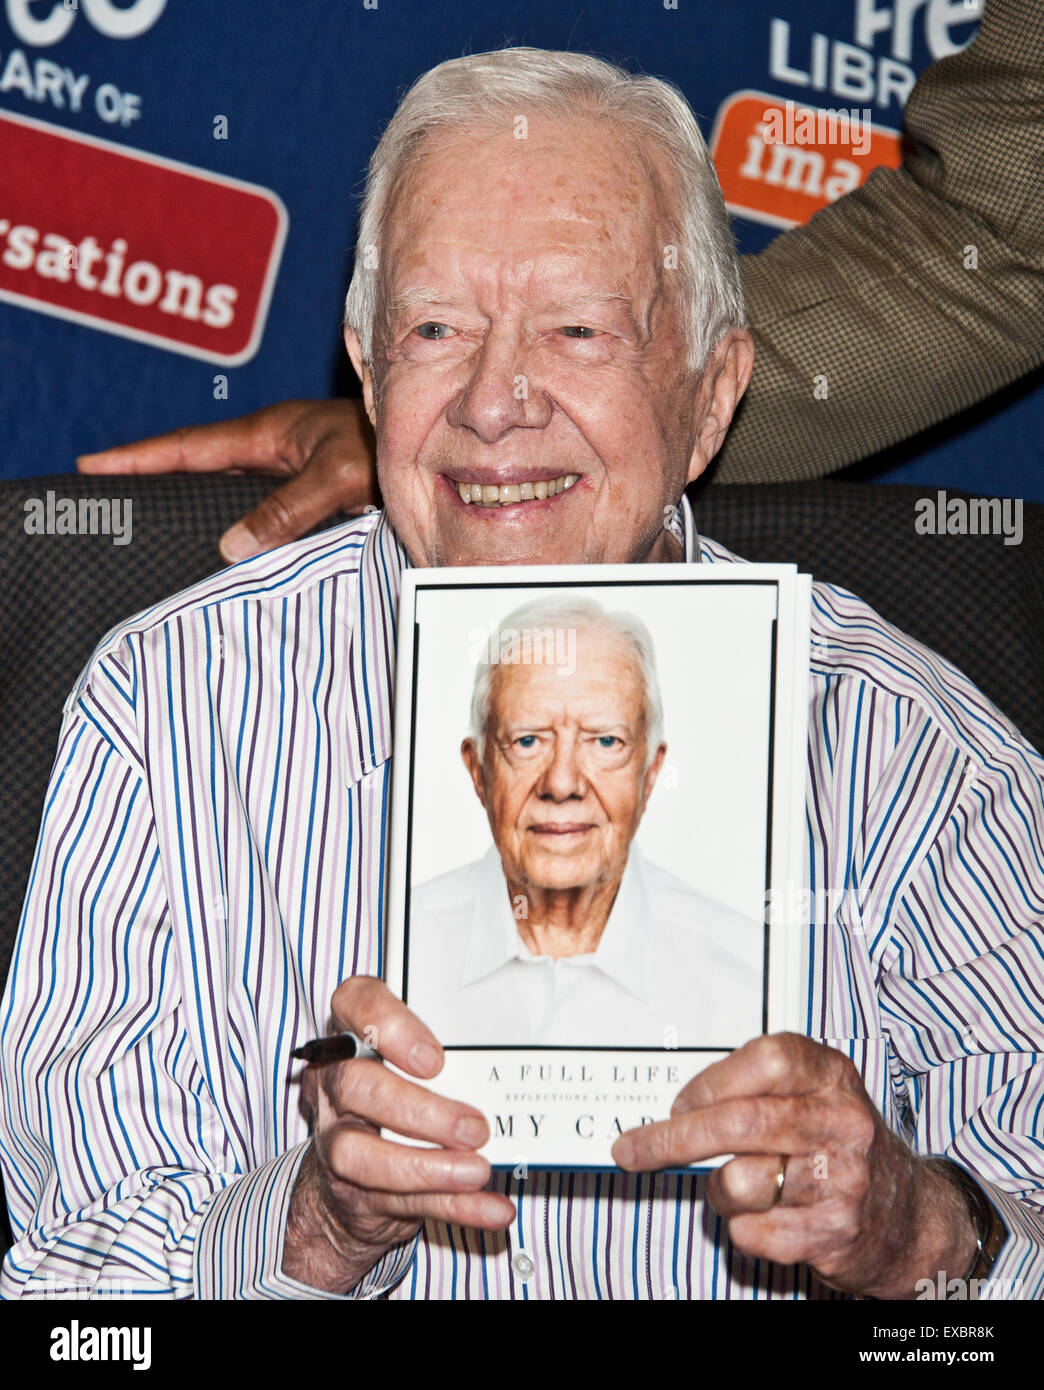 Philadelphia, Pennsylvania, USA. 10th July, 2015. Former President Jimmy Carter Signs His New Book 'A Full Life: Reflections at Ninety' at The Free Library of Philadelphia on July 10, 2015 in Philadelphia, Pennsylvania, United States. Credit:  Paul Froggatt/Alamy Live News Stock Photo